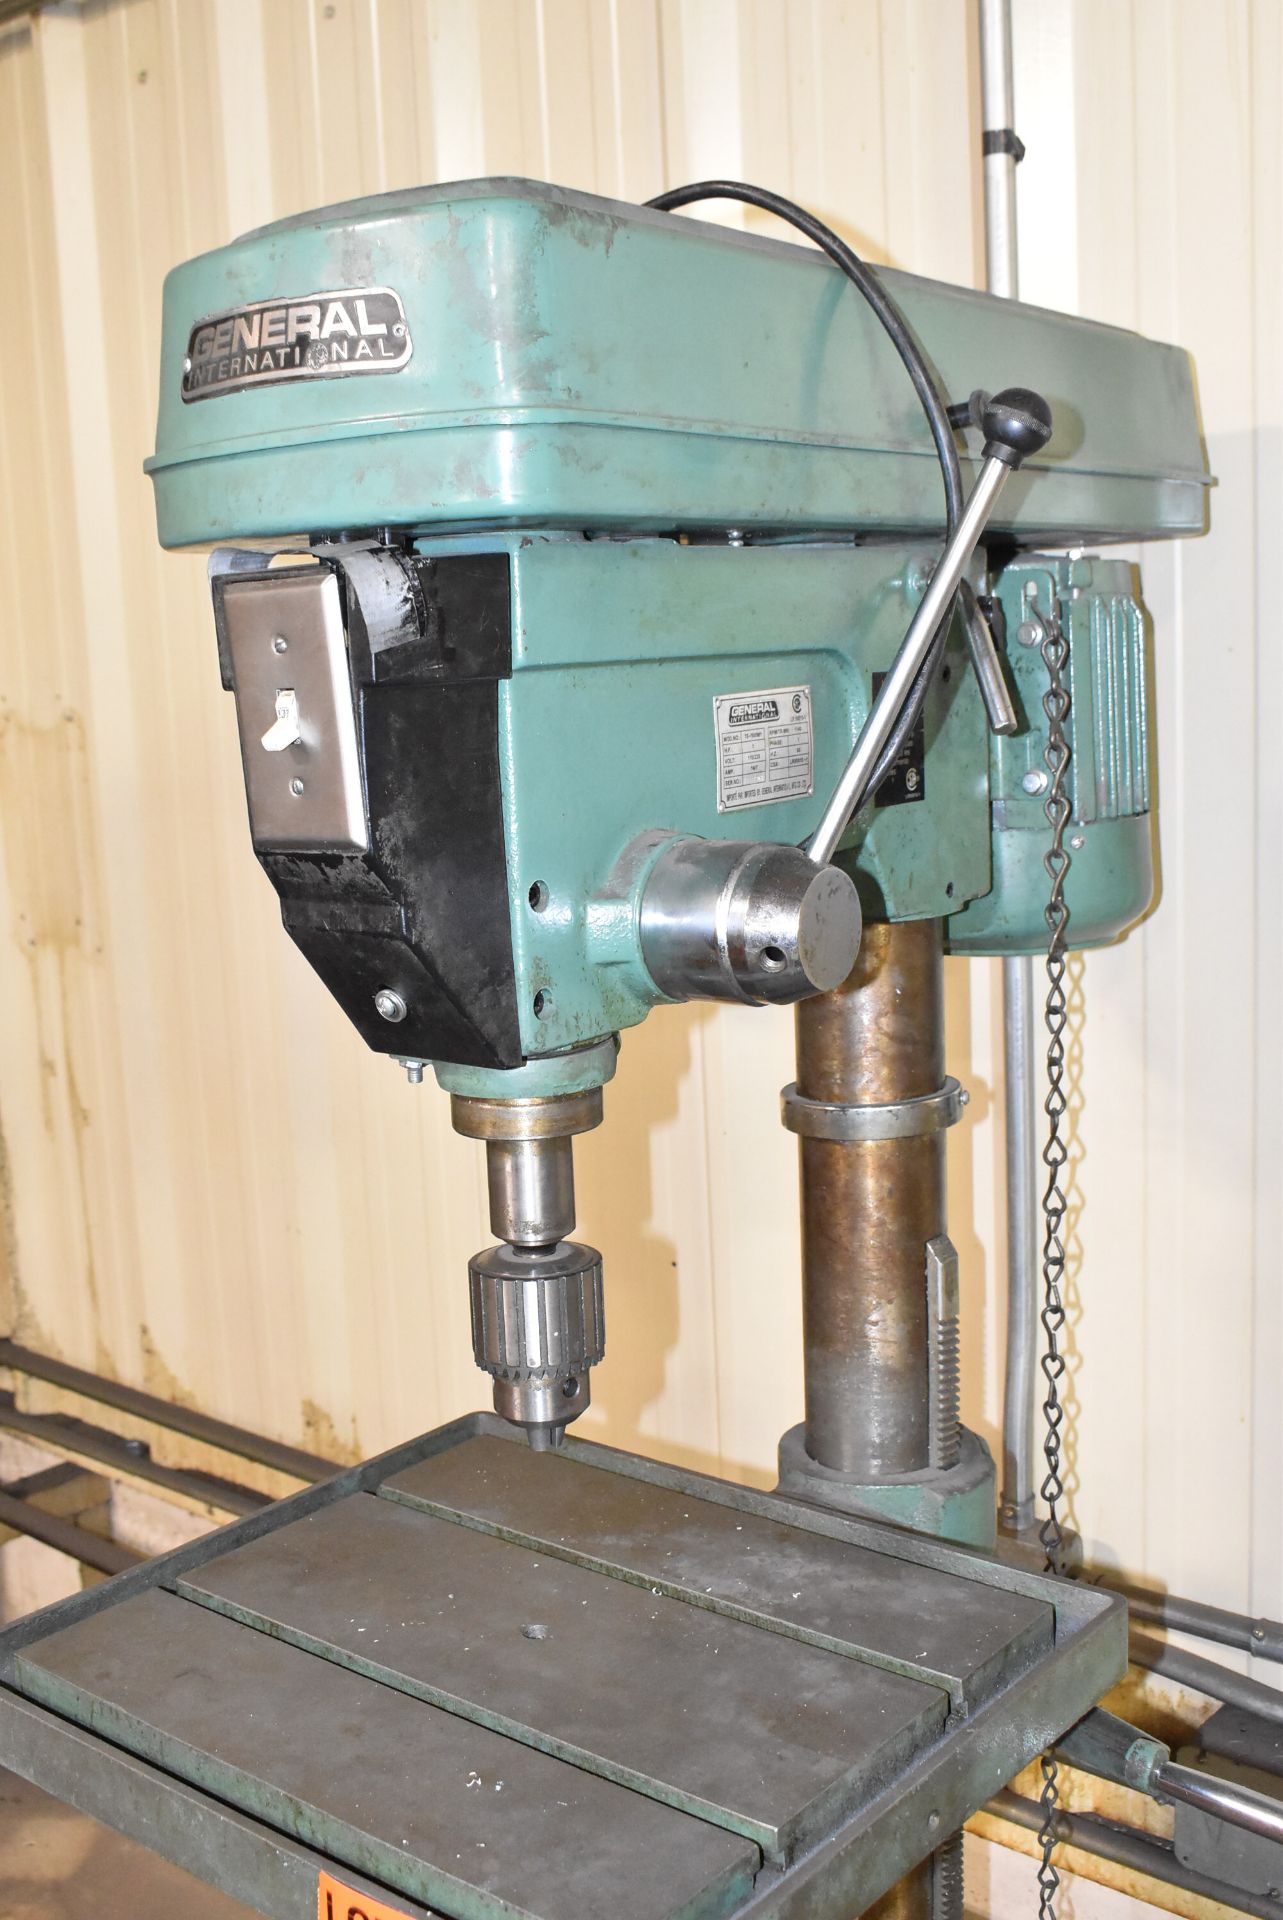 GENERAL INTERNATIONAL 75-500M1 FLOOR TYPE DRILL PRESS, 1140 RPM, S/N 78074308 [RIGGING FOR FOR - Image 3 of 5